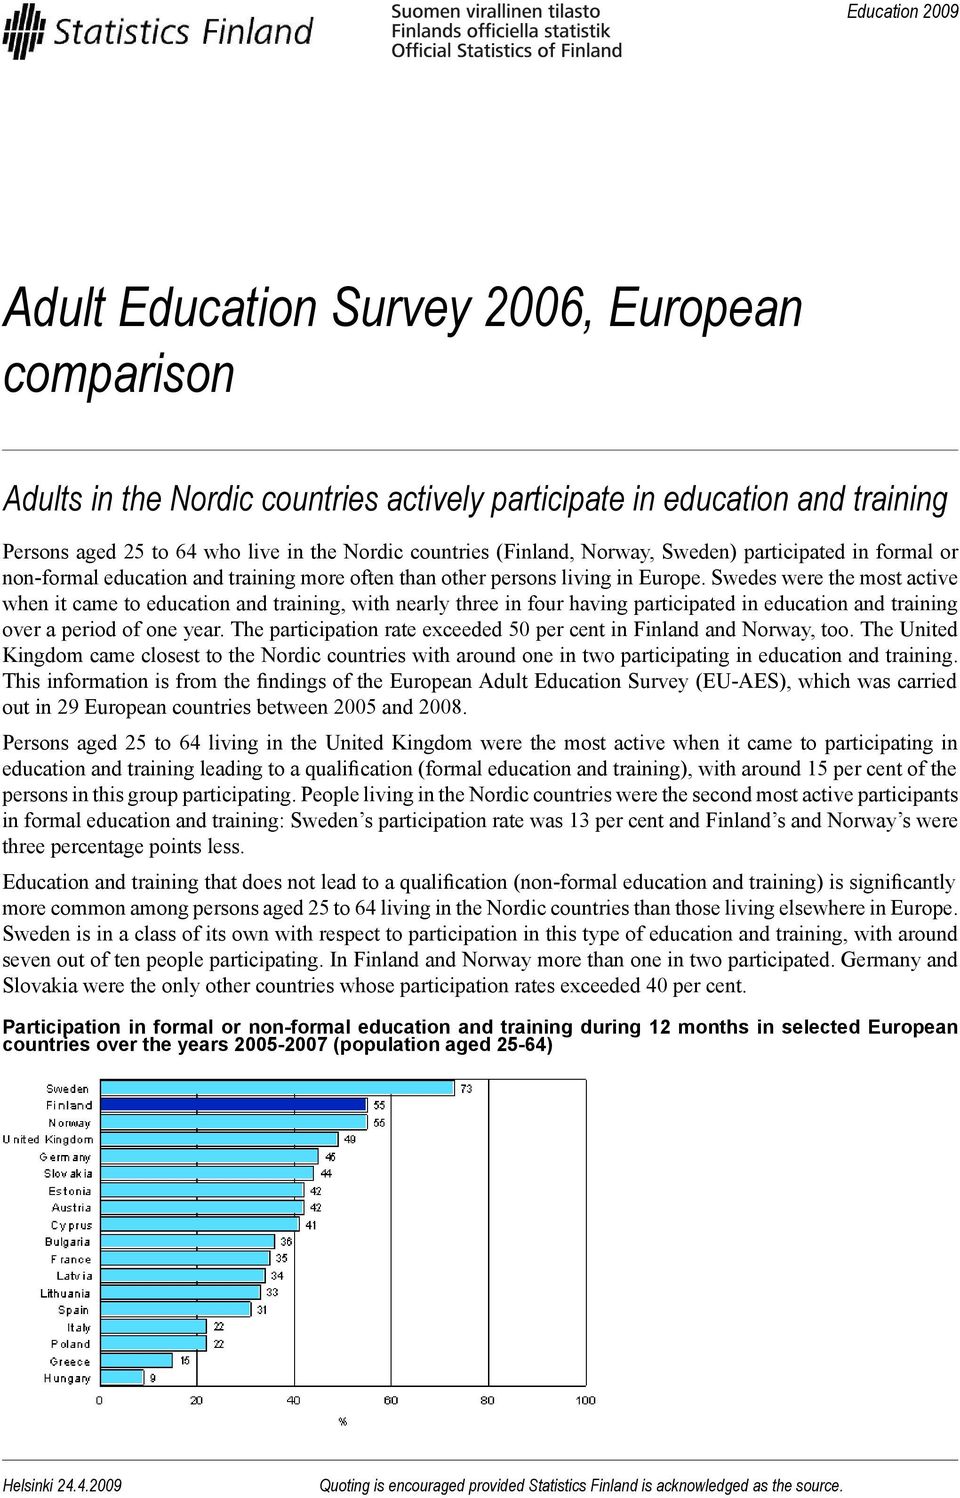 Swedes were the most active when it came to education and training, with nearly three in four having participated in education and training over a period of one year.